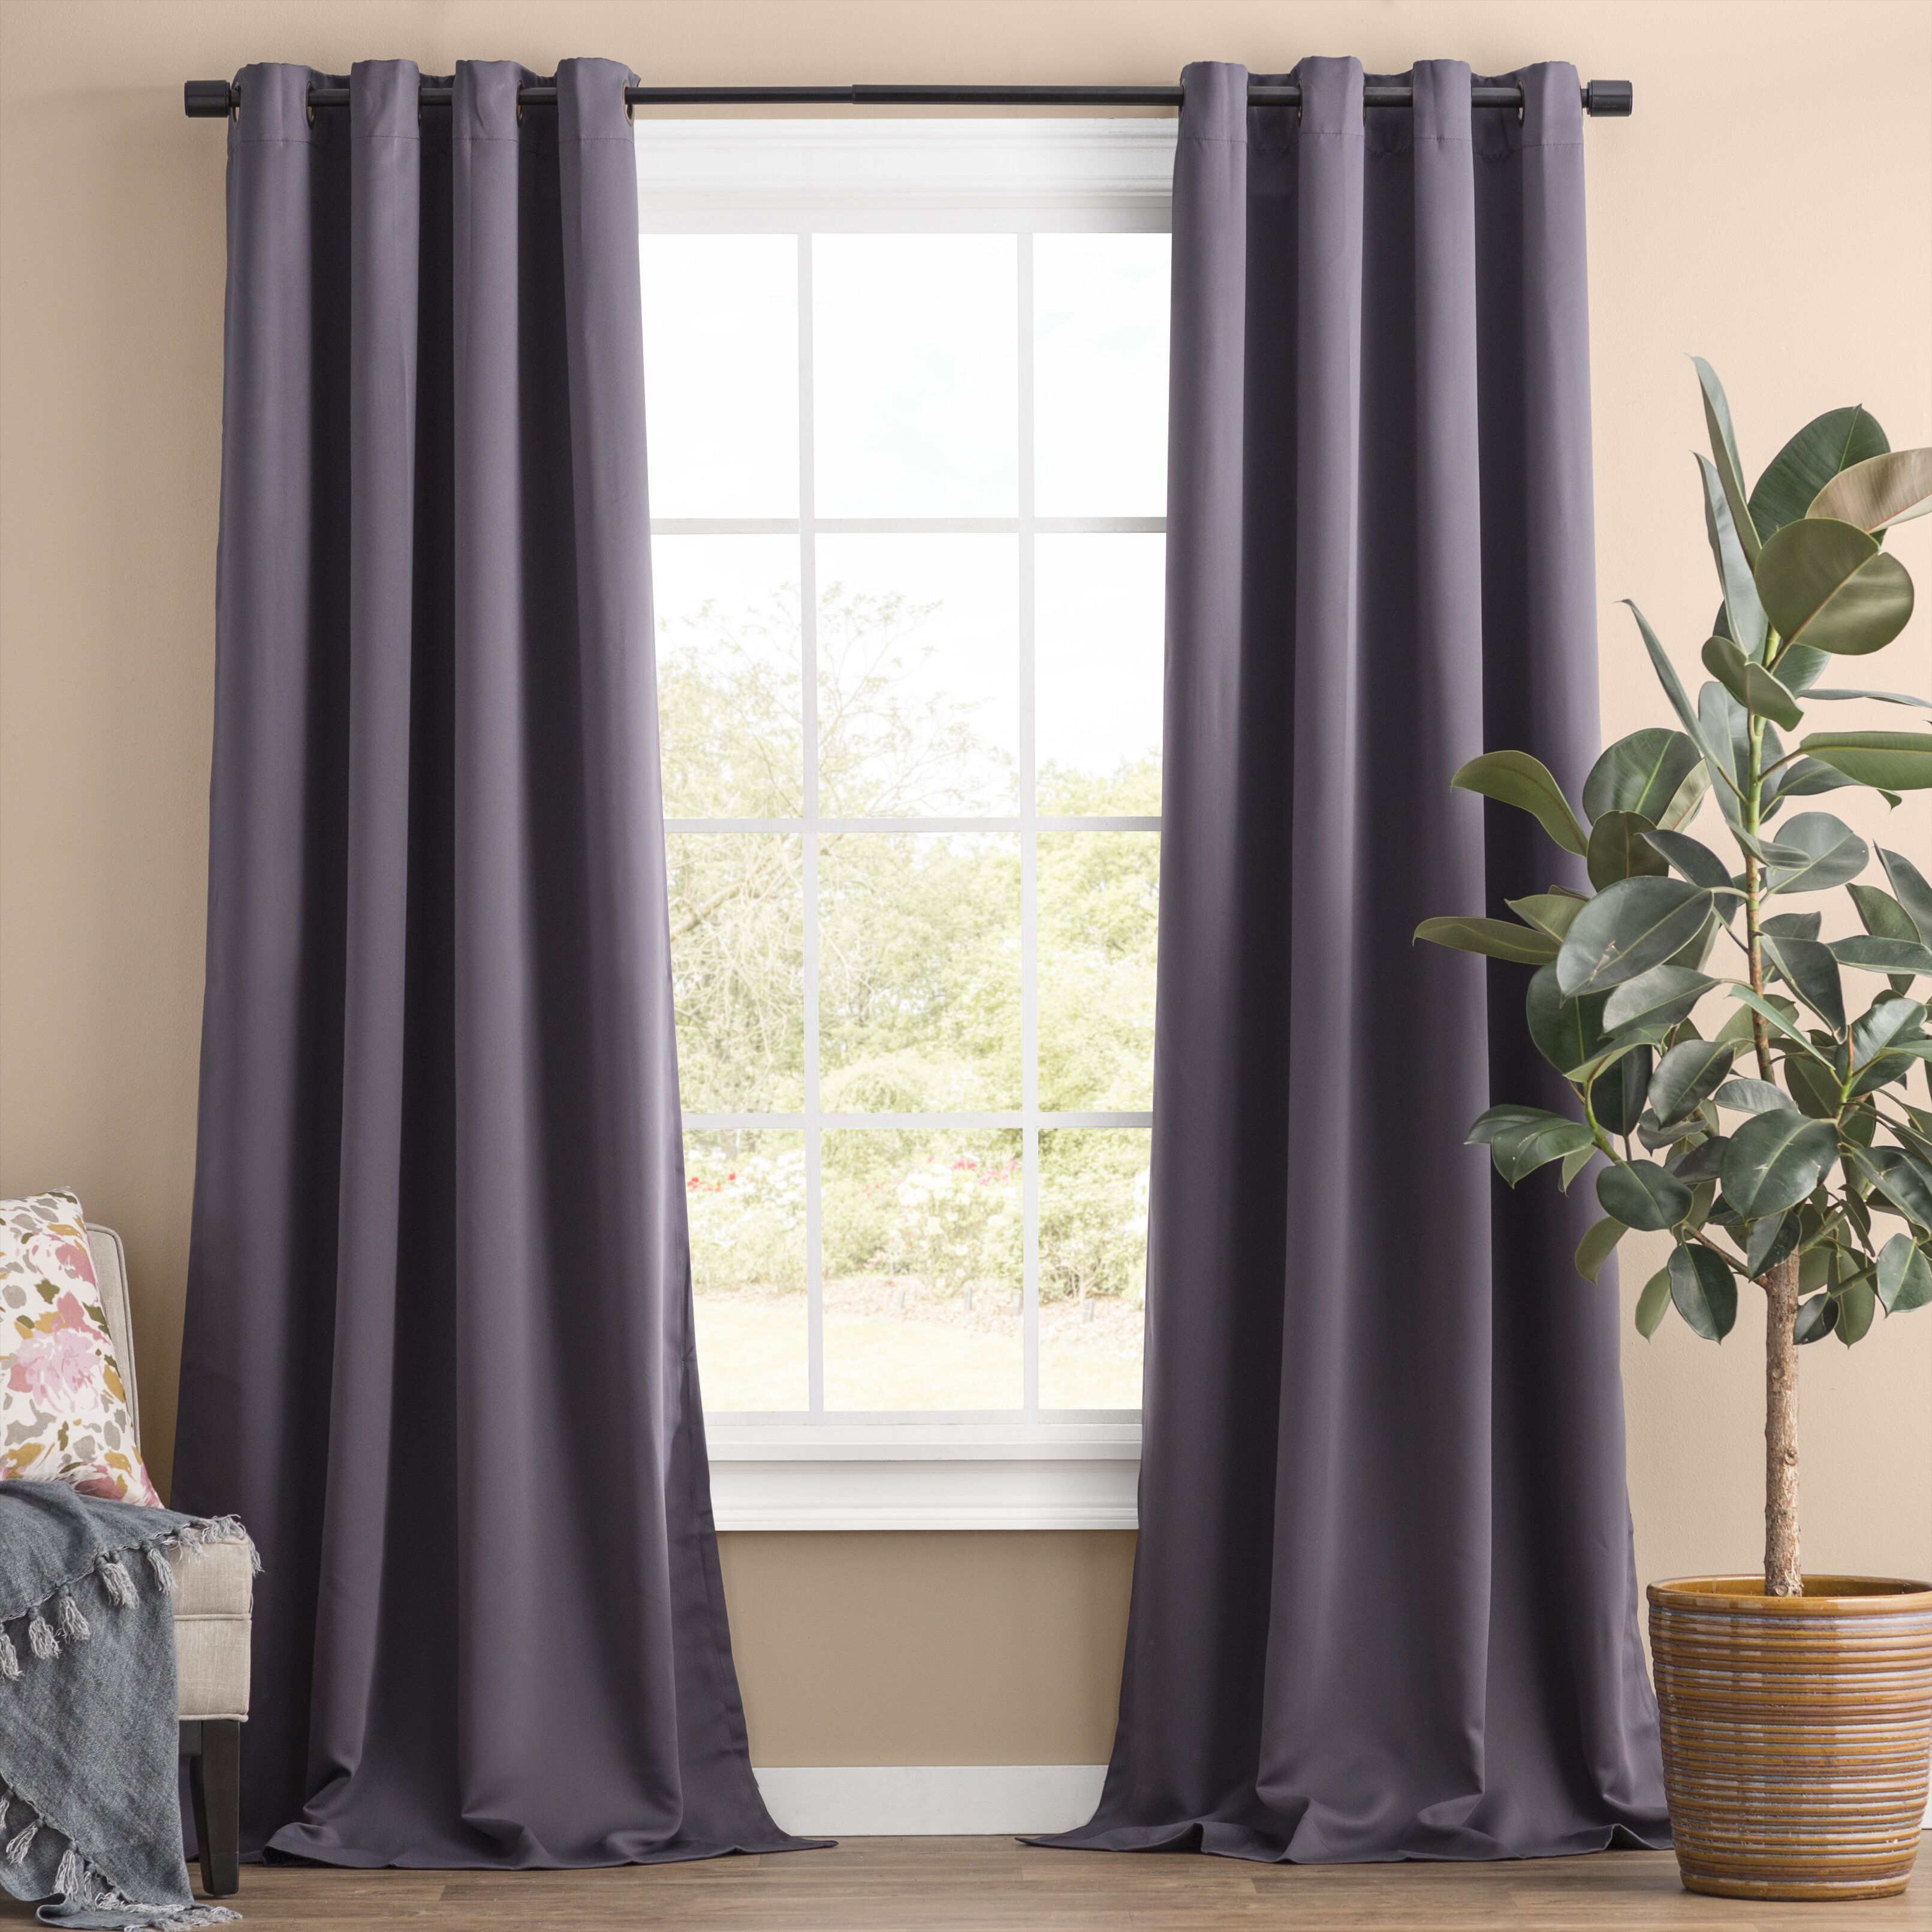 Solid Blackout Thermal Grommet Curtain Panels Inside Cooper Textured Thermal Insulated Grommet Curtain Panels (View 14 of 20)